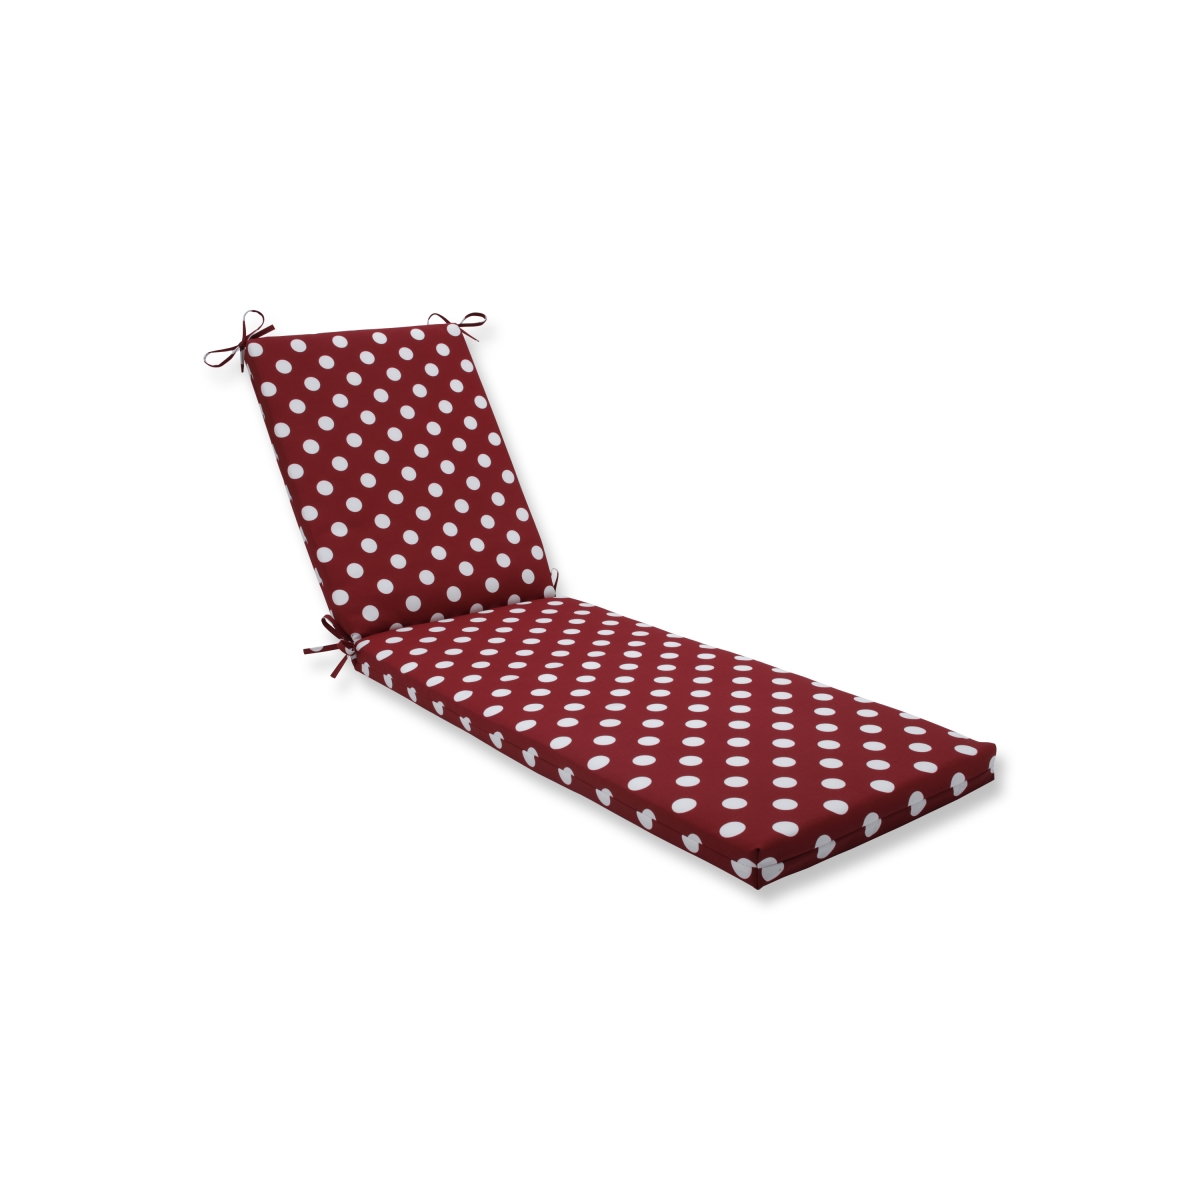 80 X 23 X 3 In. Outdoor & Indoor Polka Dot Chaise Lounge Cushion, Red